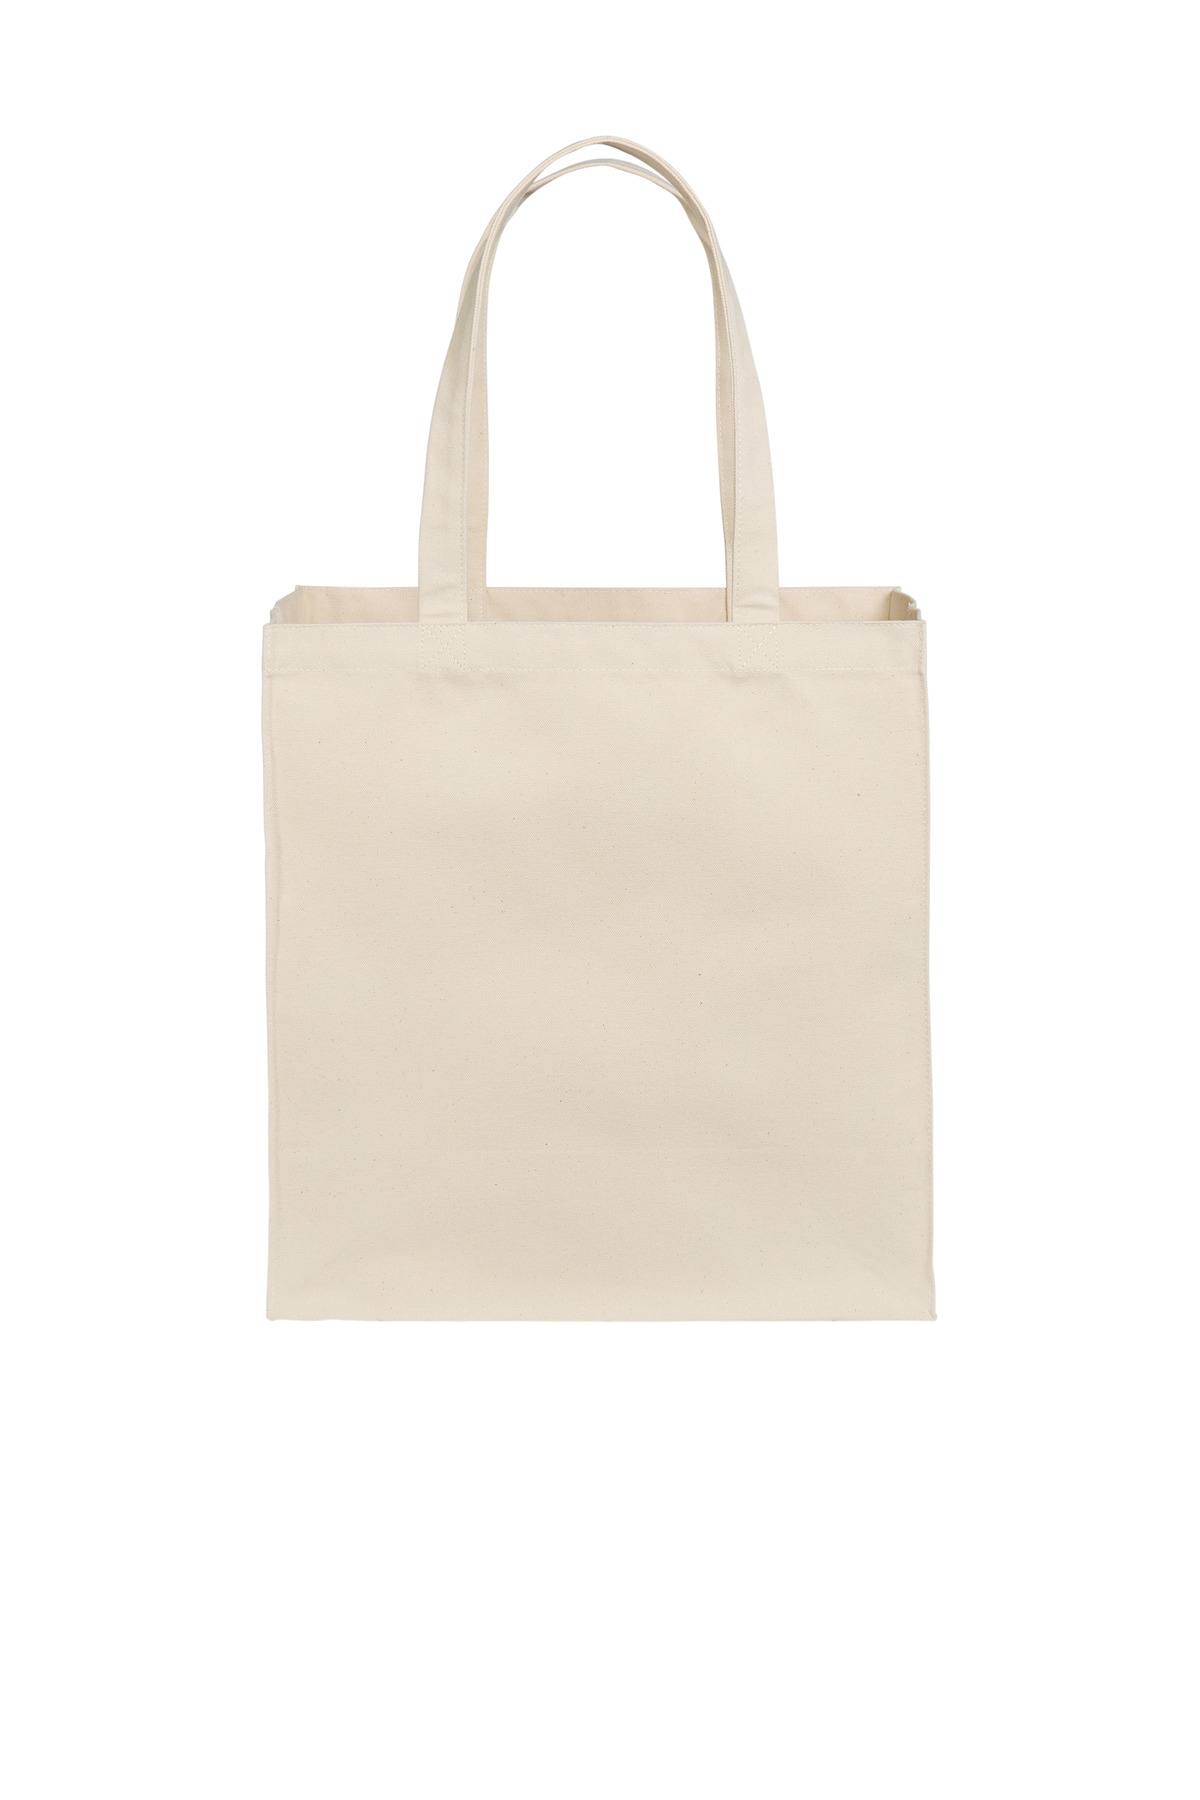 Port Authority Cotton Canvas Over-the-Shoulder Tote...